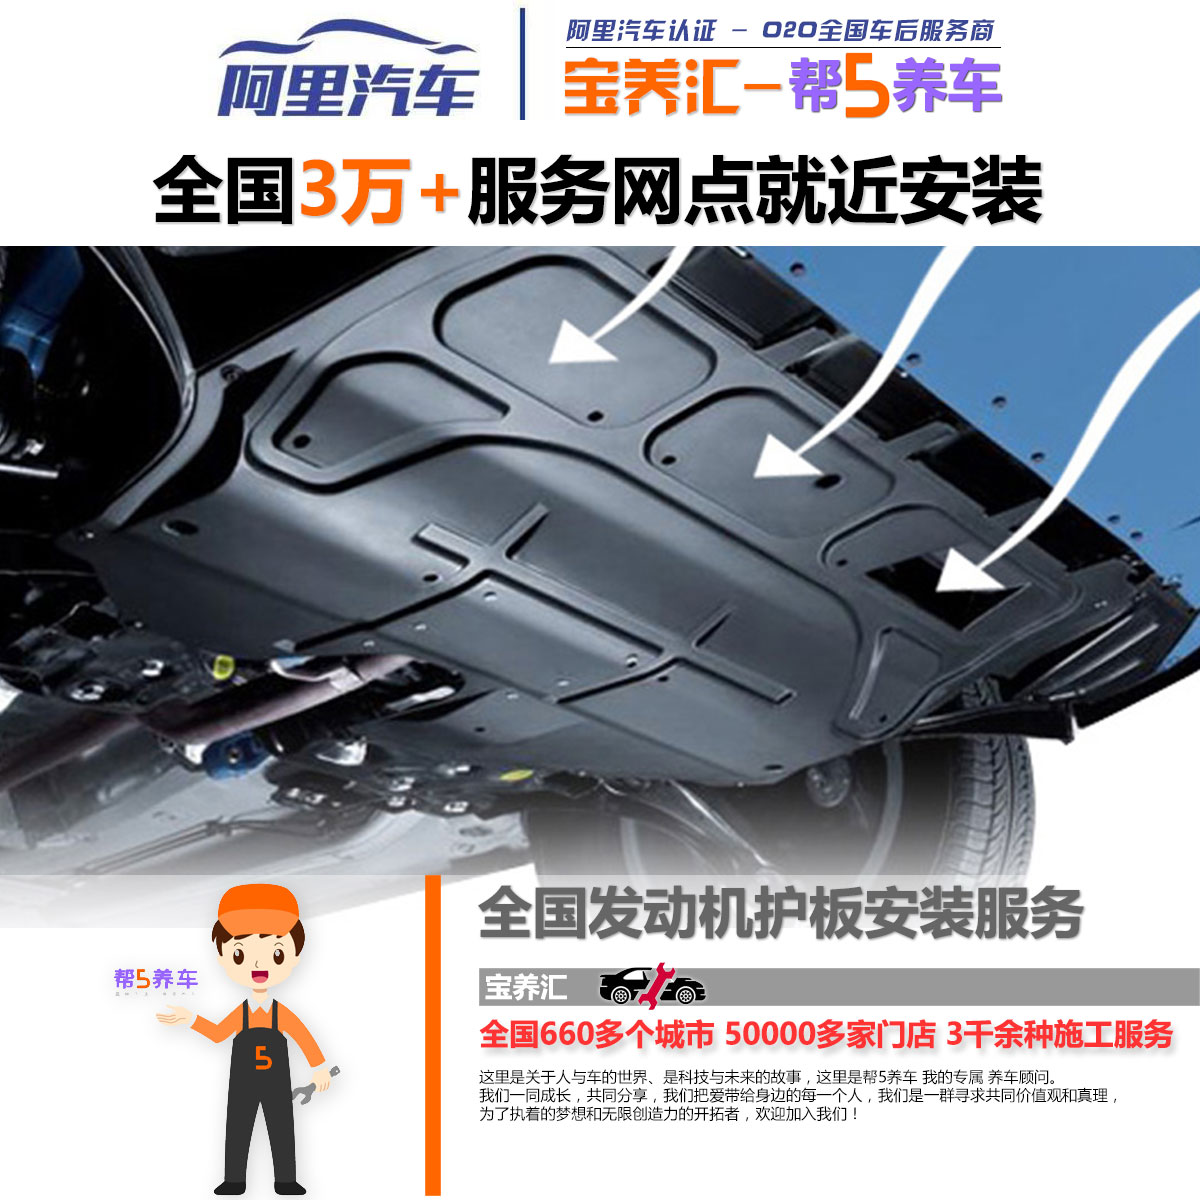 (Bao Yanghui) engine baffle chassis skid plate installation labor cost manpower hours cost national service stores